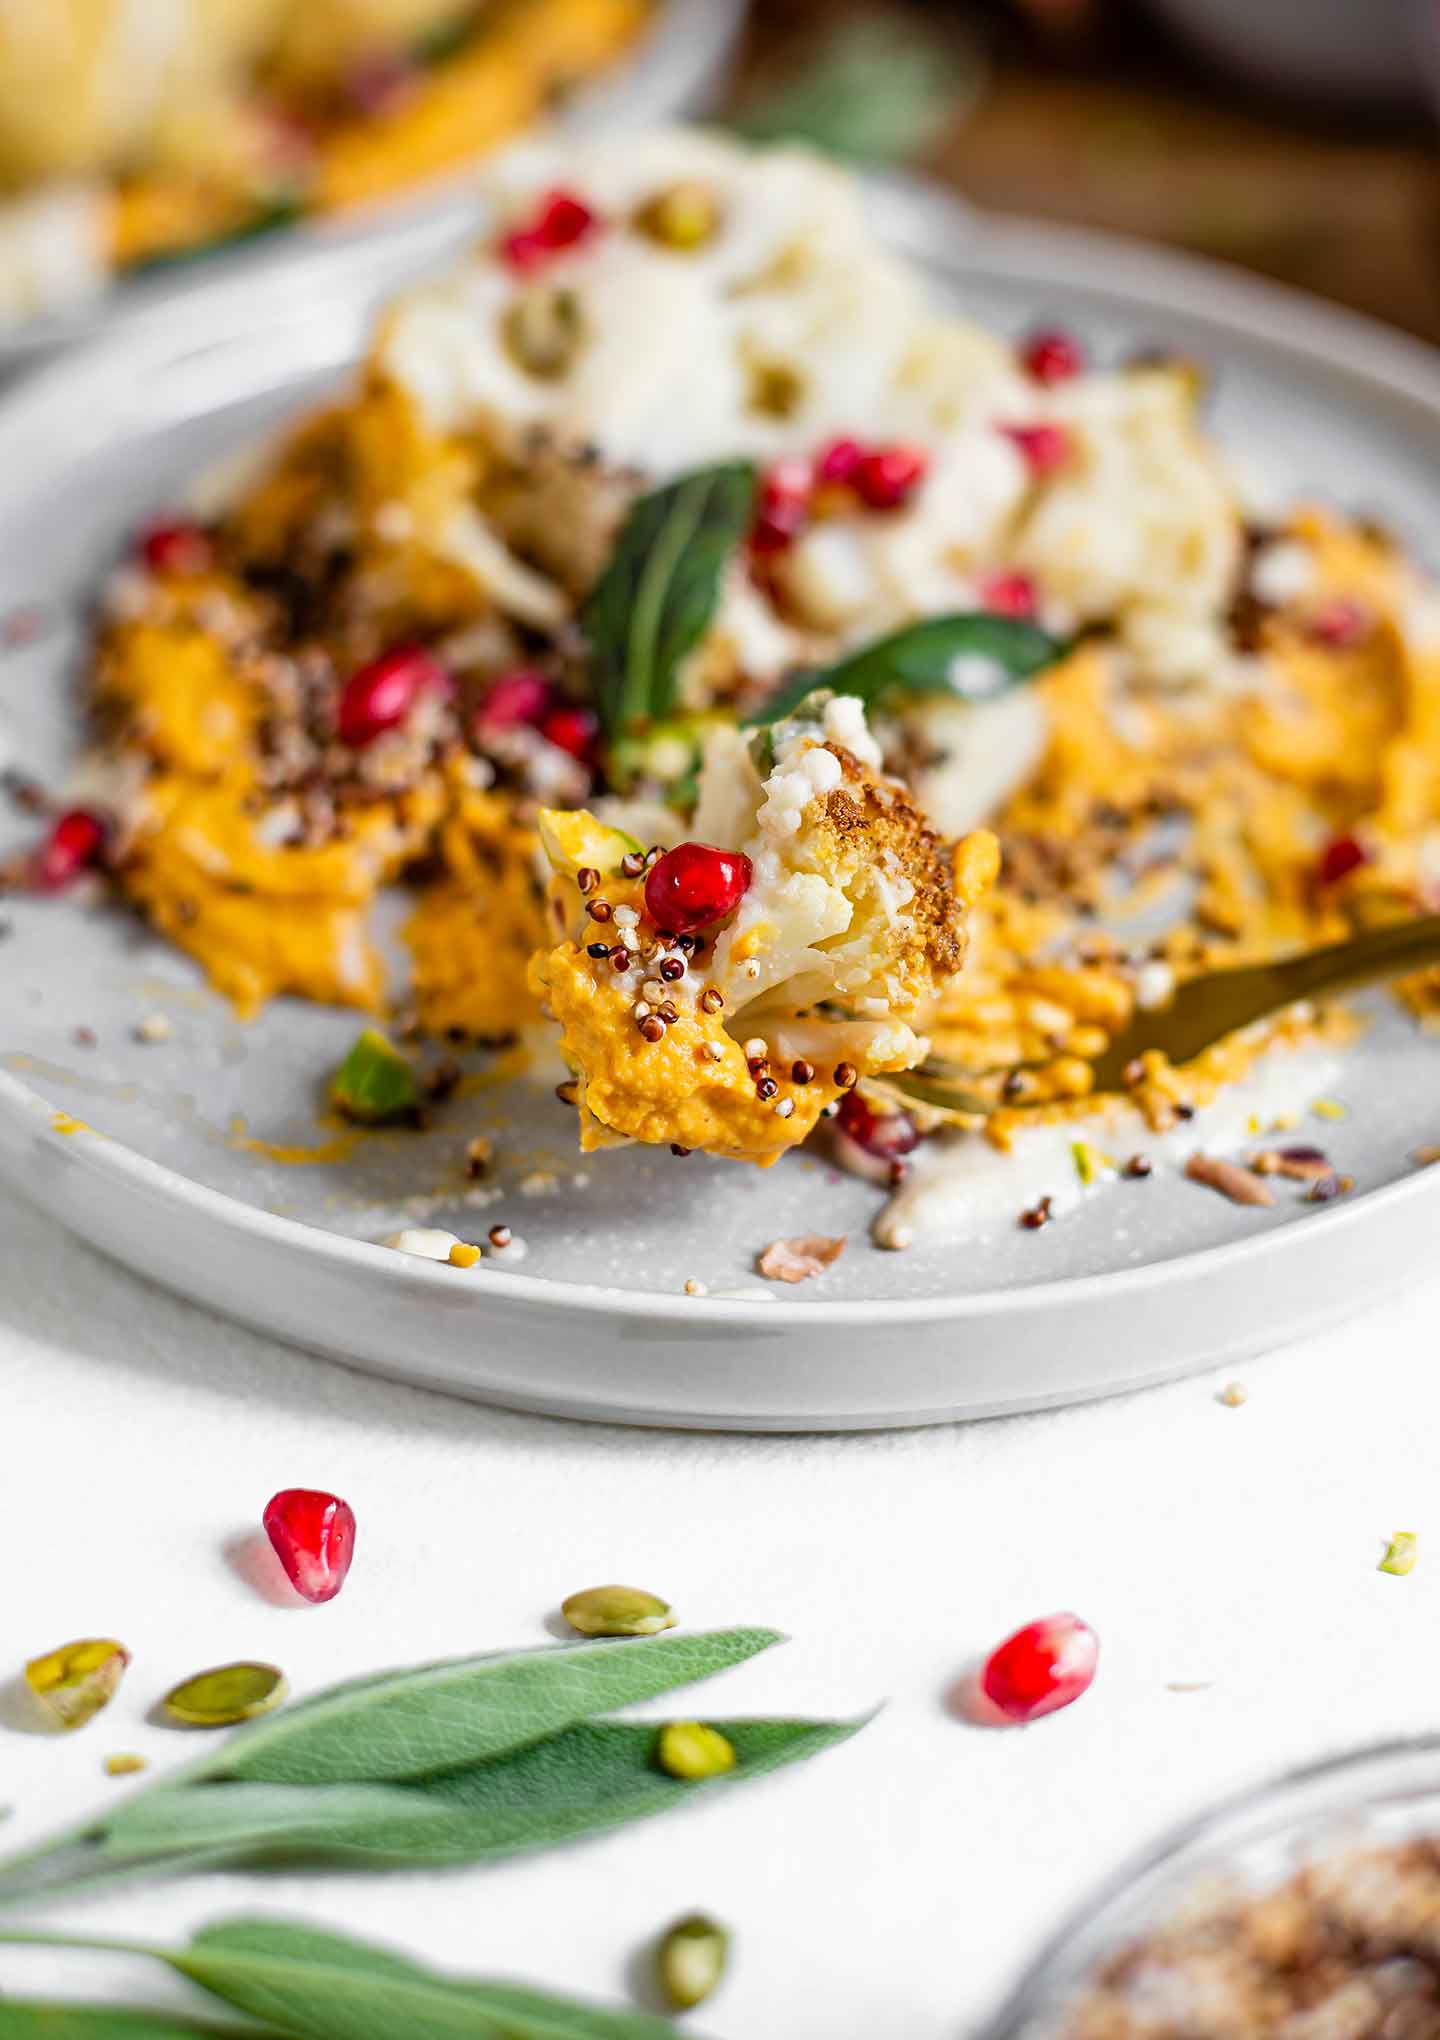 An extreme close-up of a fork holding a scoop of roasted cauliflower with some hummus, popped quinoa, and pomegranate. A tasty bite!